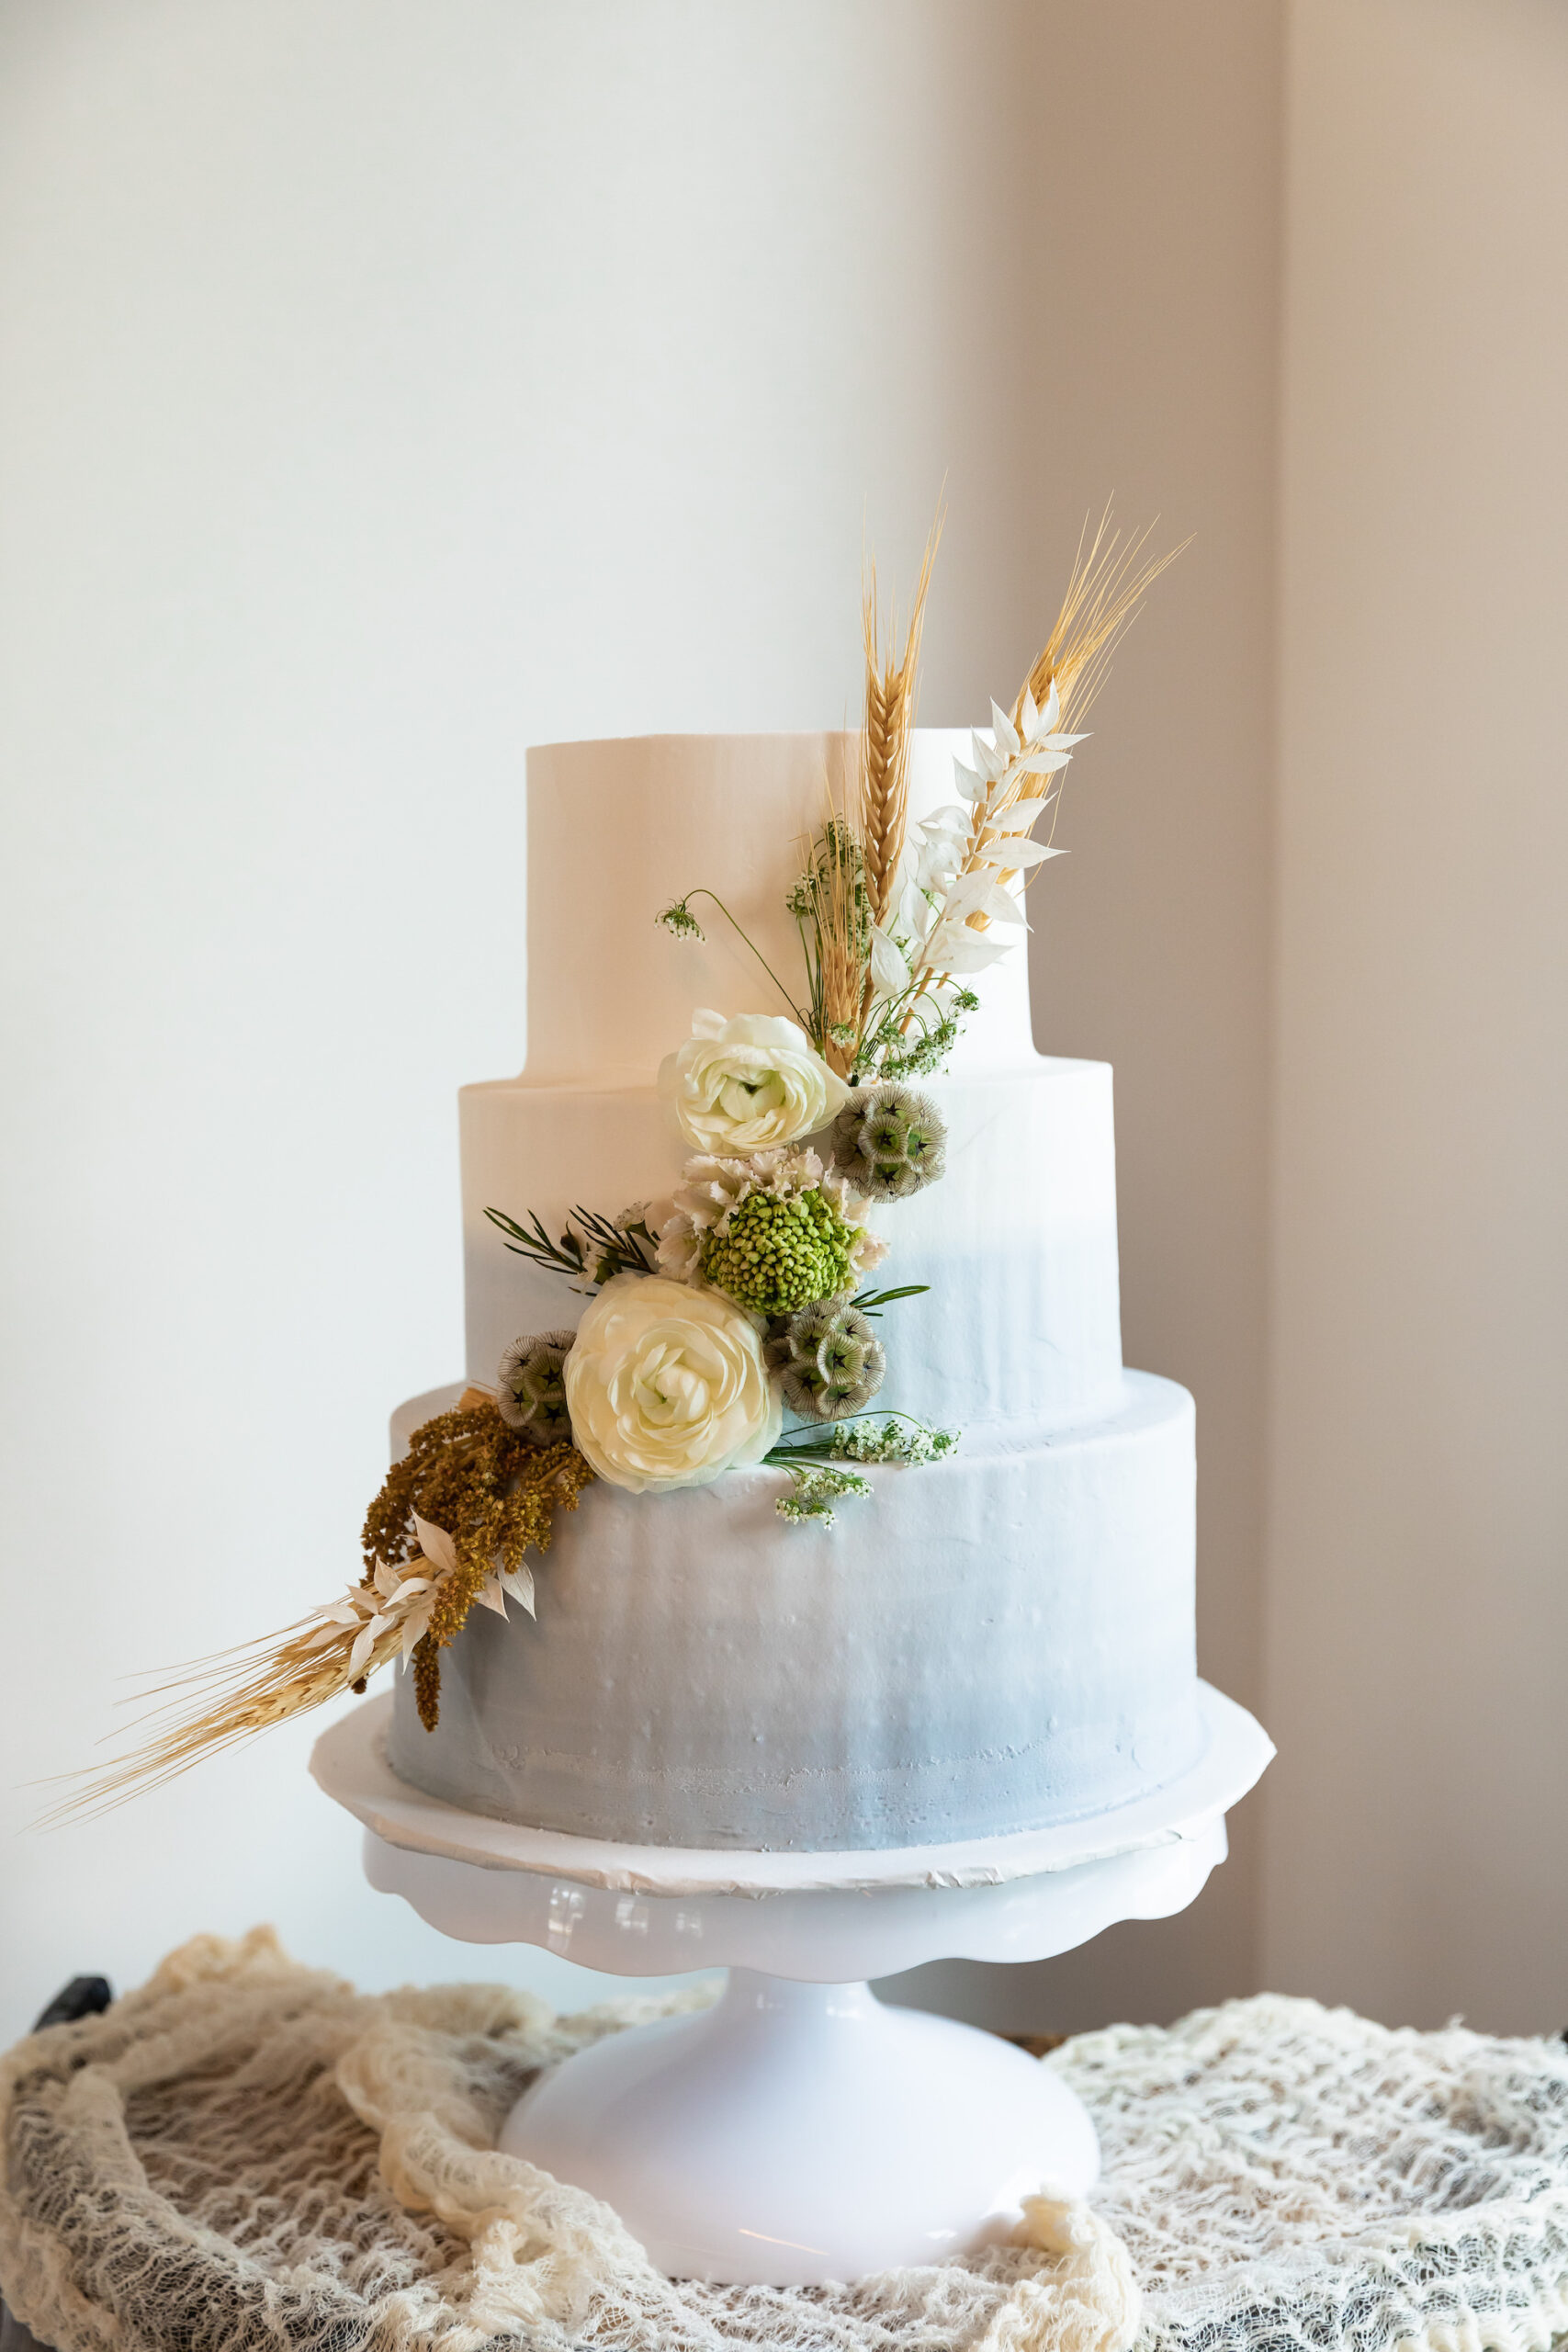 Three Tier White and Light Blue Ombre Wedding Cake with Dried Flowers Floral PIece